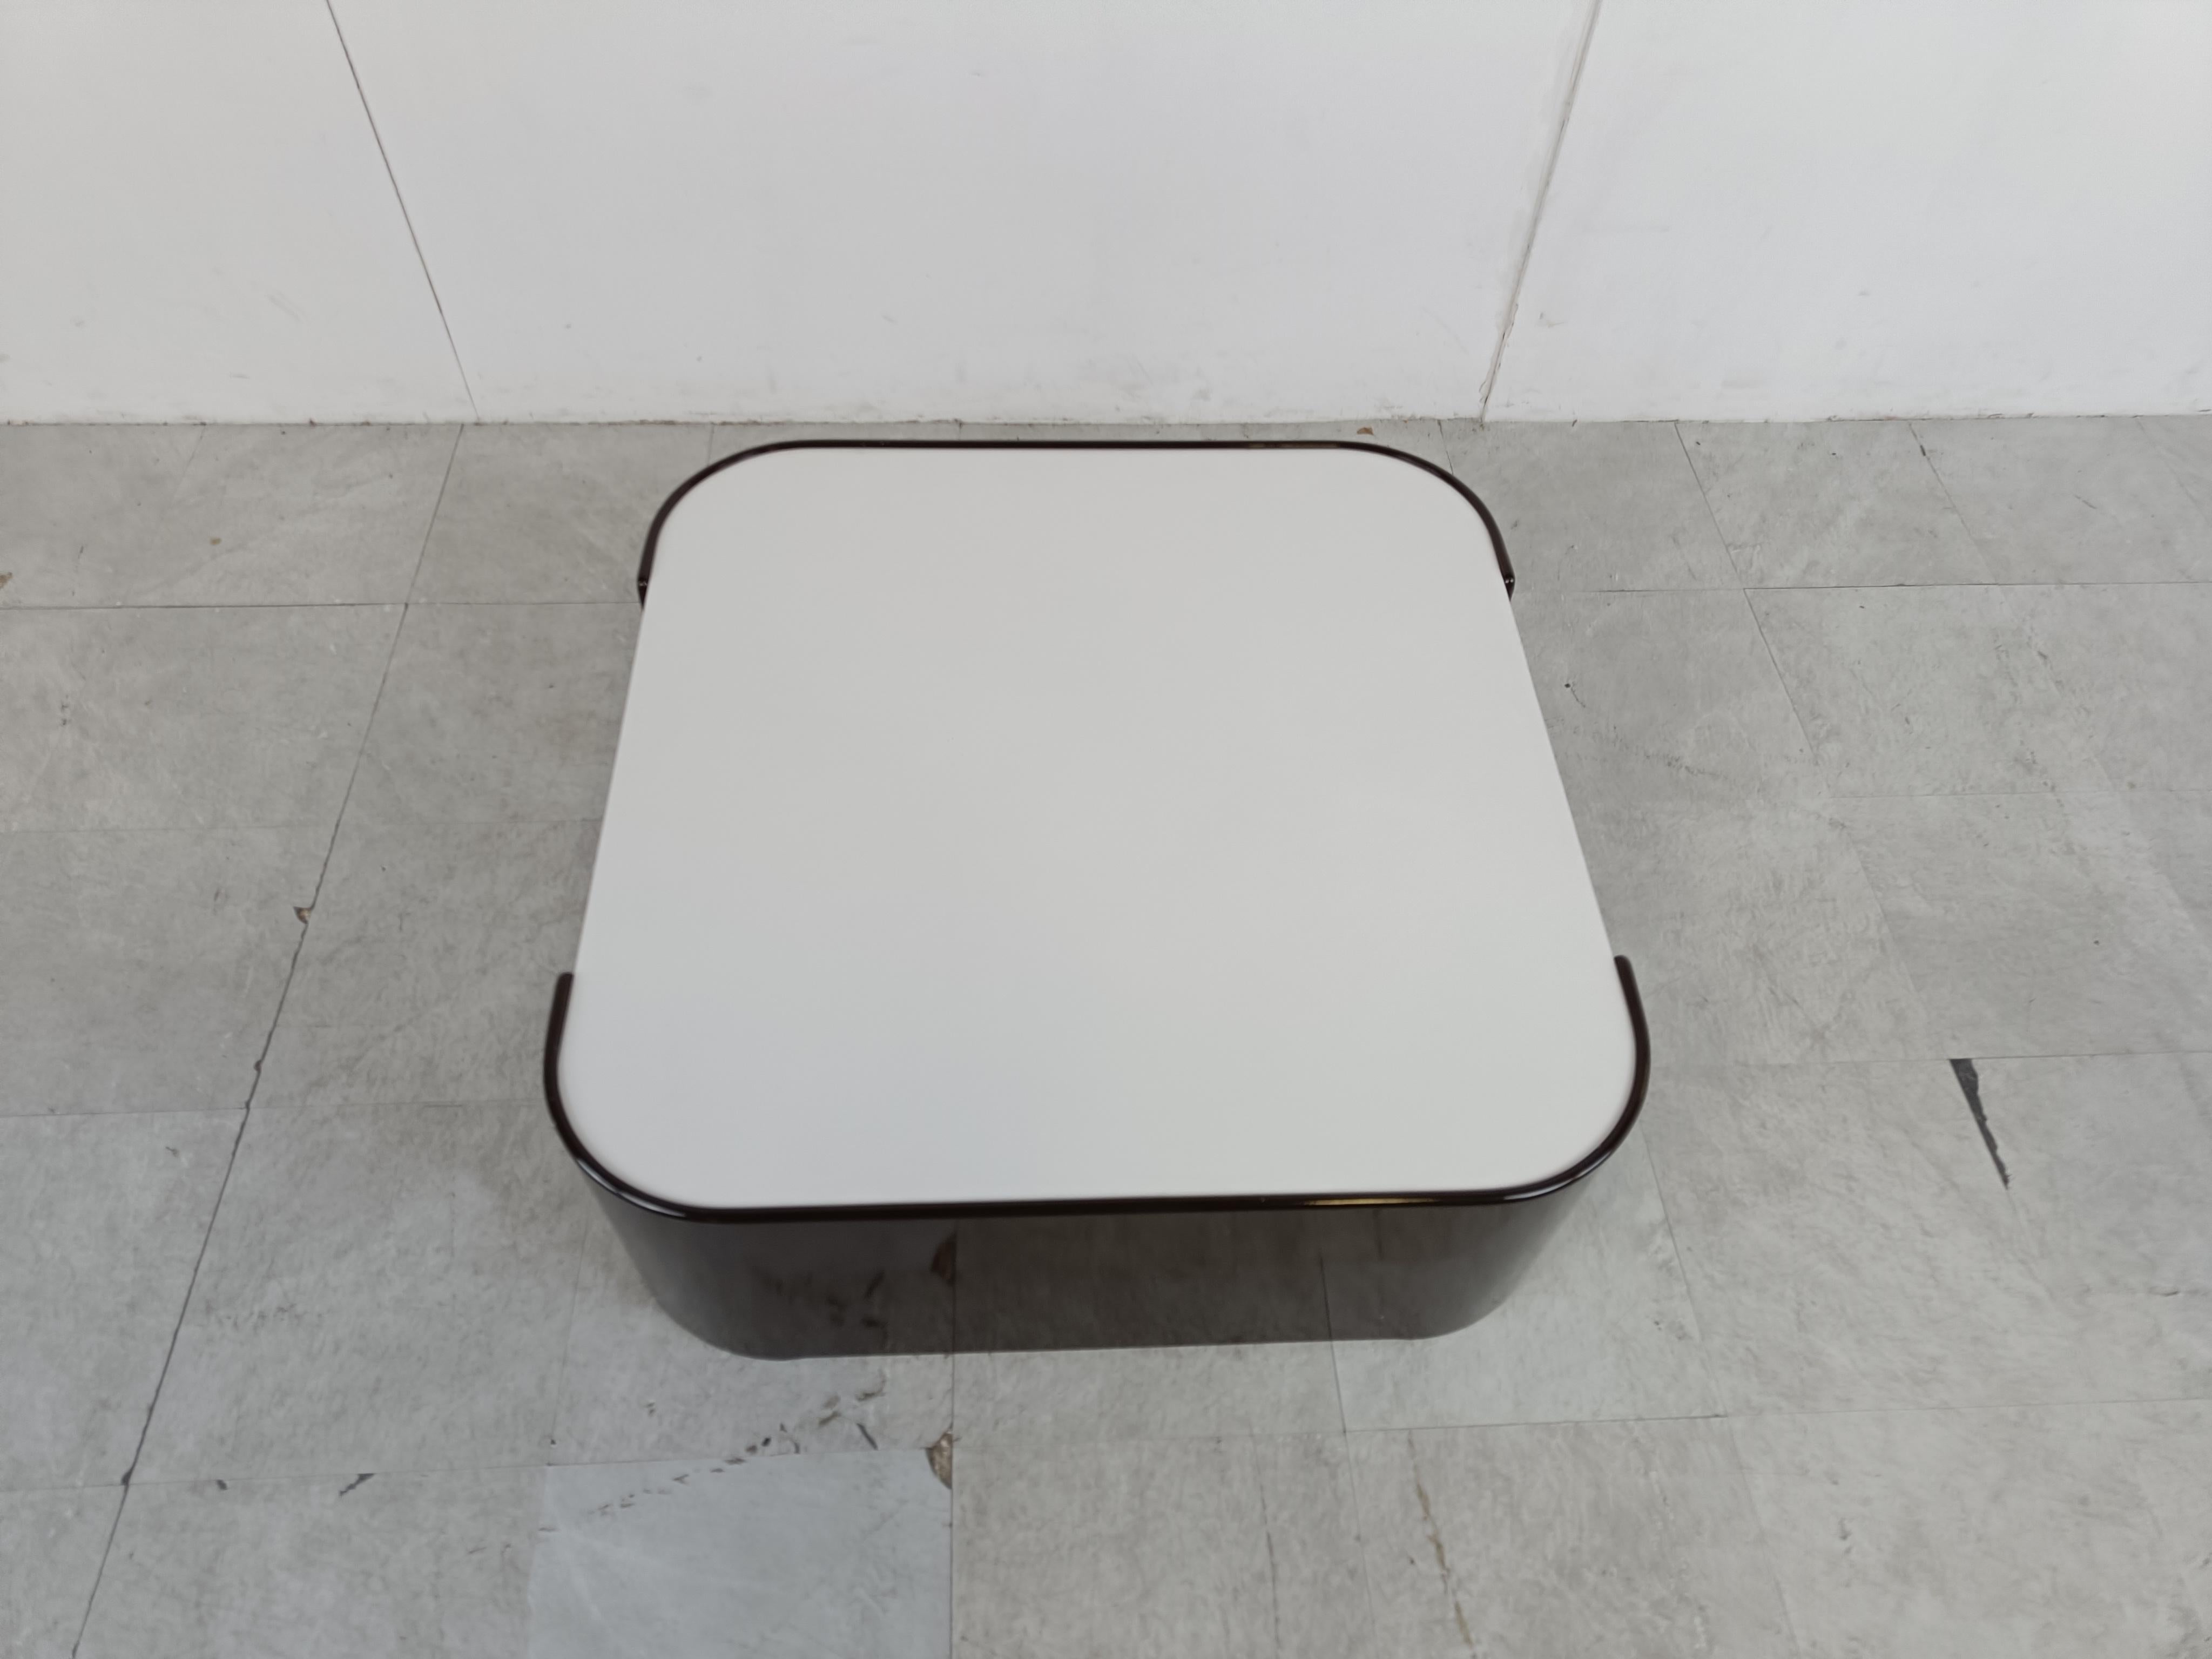 Two tone brown and white wooden space age coffee table.

1970s - Germany

Good condition

Dimensions:
Height: 30cm/11.81